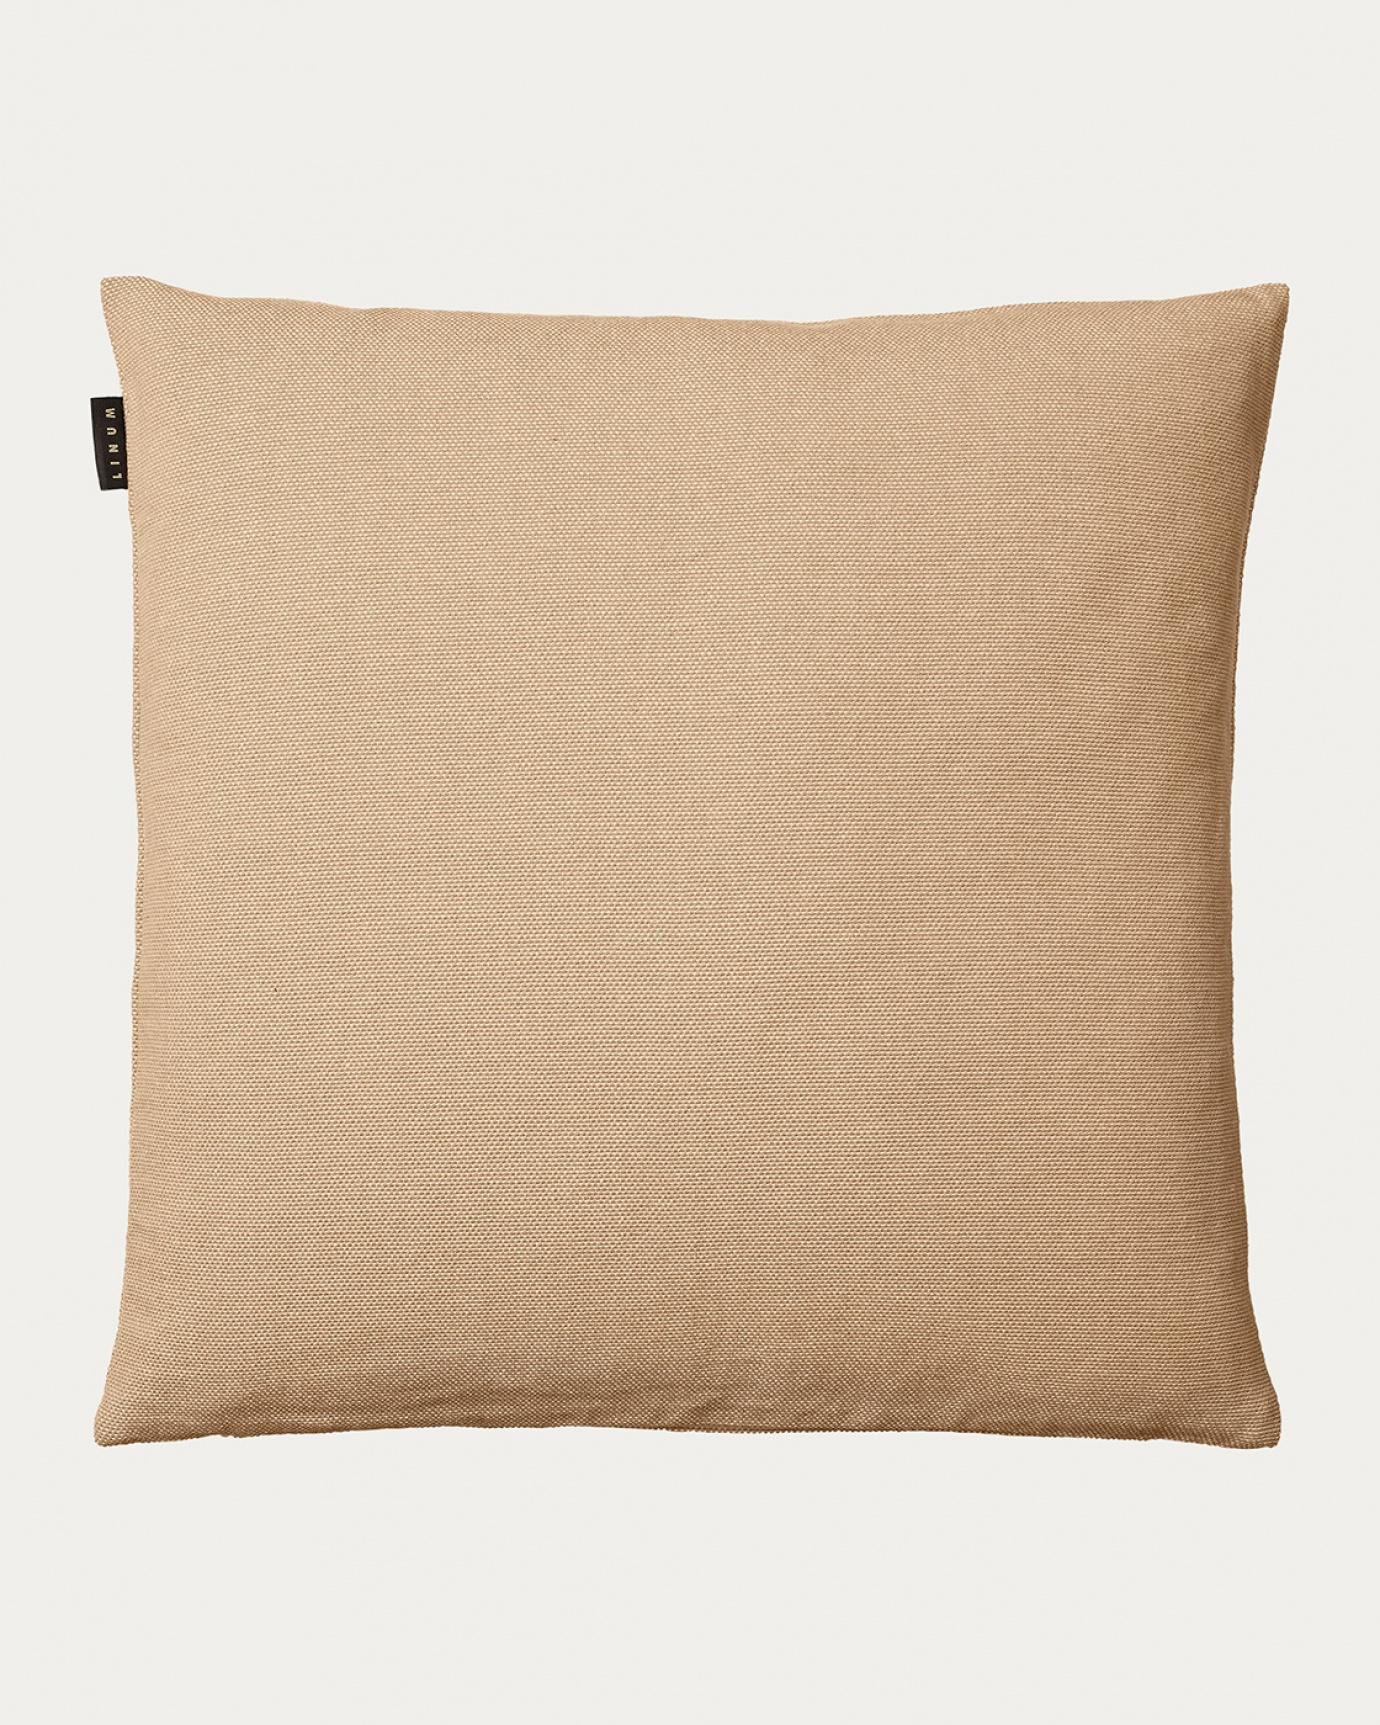 Product image camel brown PEPPER cushion cover made of soft cotton from LINUM DESIGN. Easy to wash and durable for generations. Size 60x60 cm.